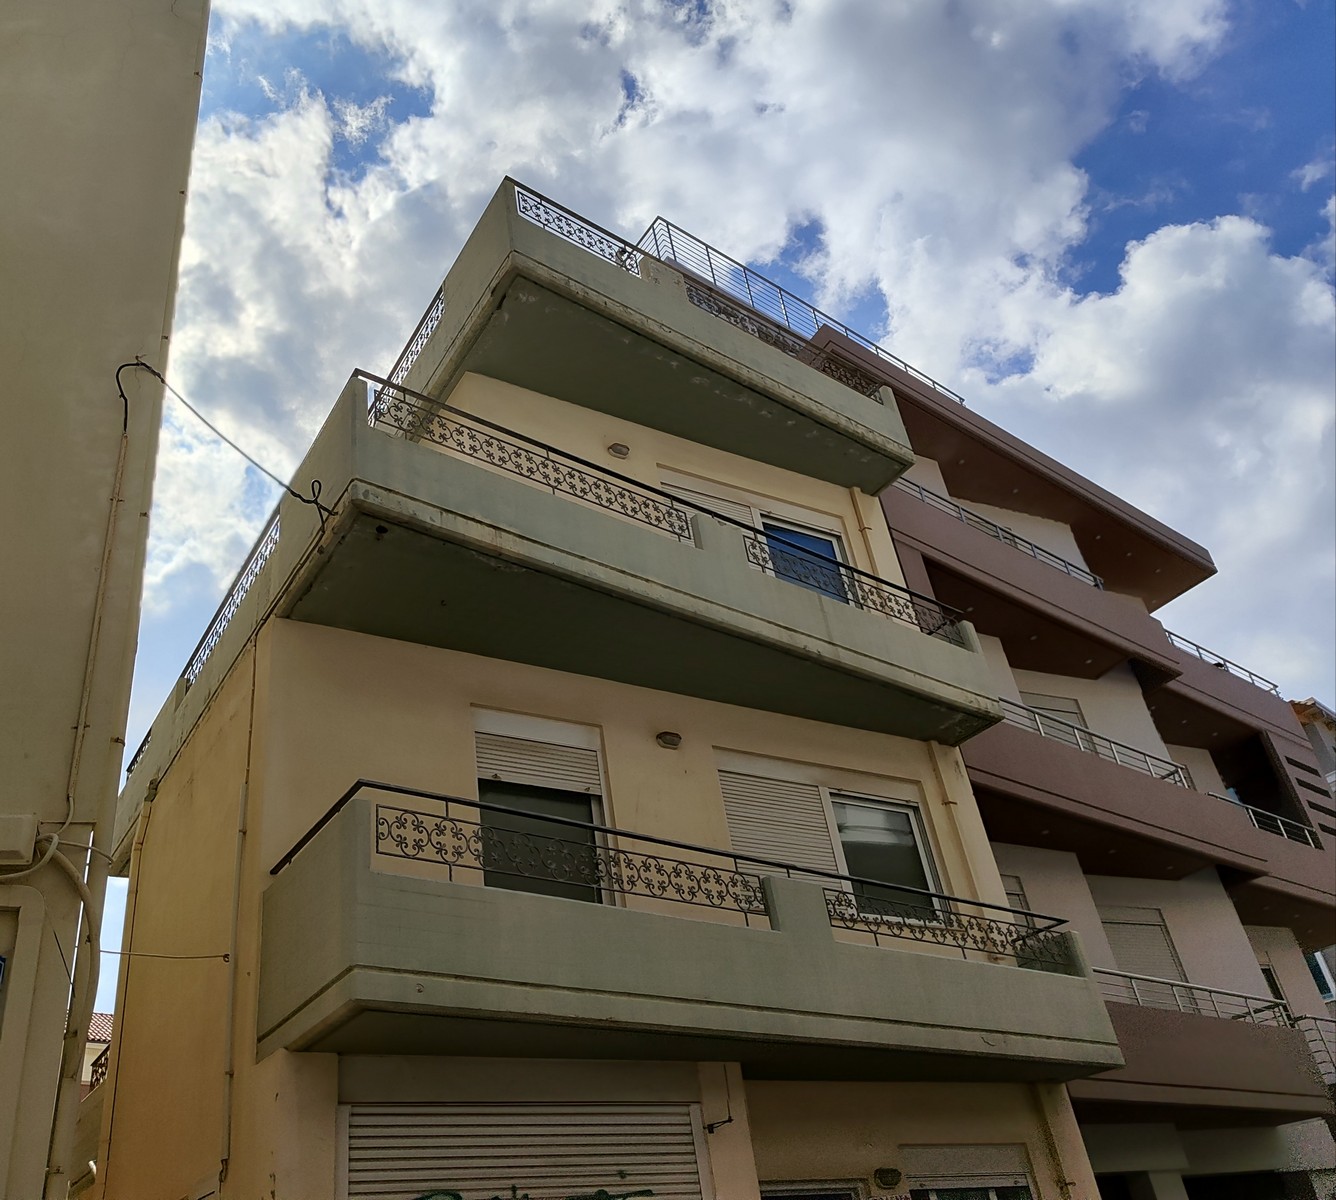 3-storey maisonette for sale in the heart of the old town of Heraklion.